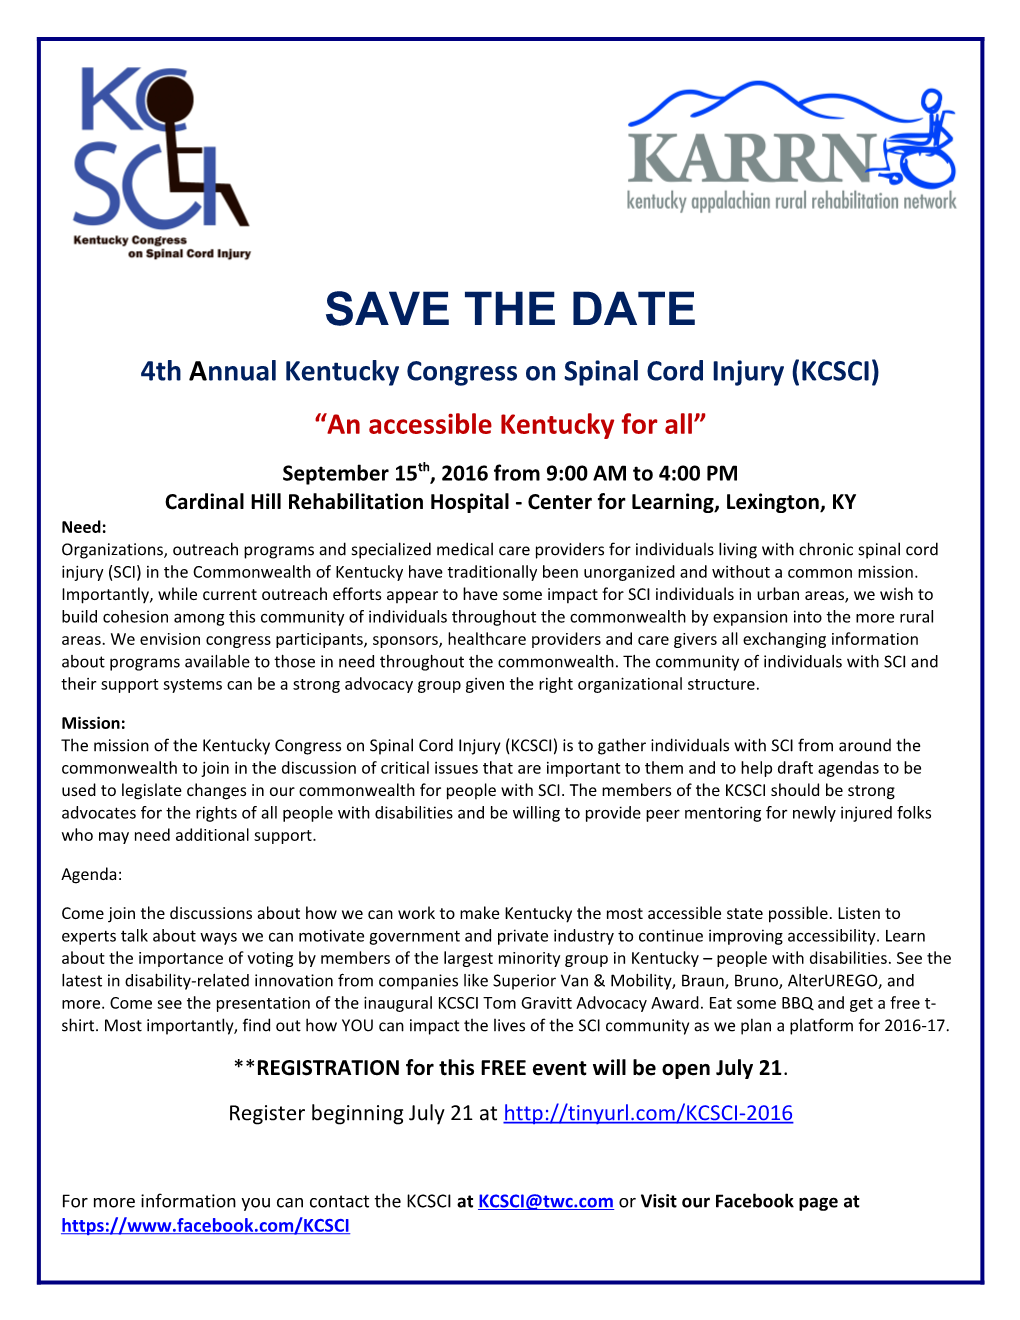 4Th Annual Kentucky Congress on Spinal Cord Injury (KCSCI)